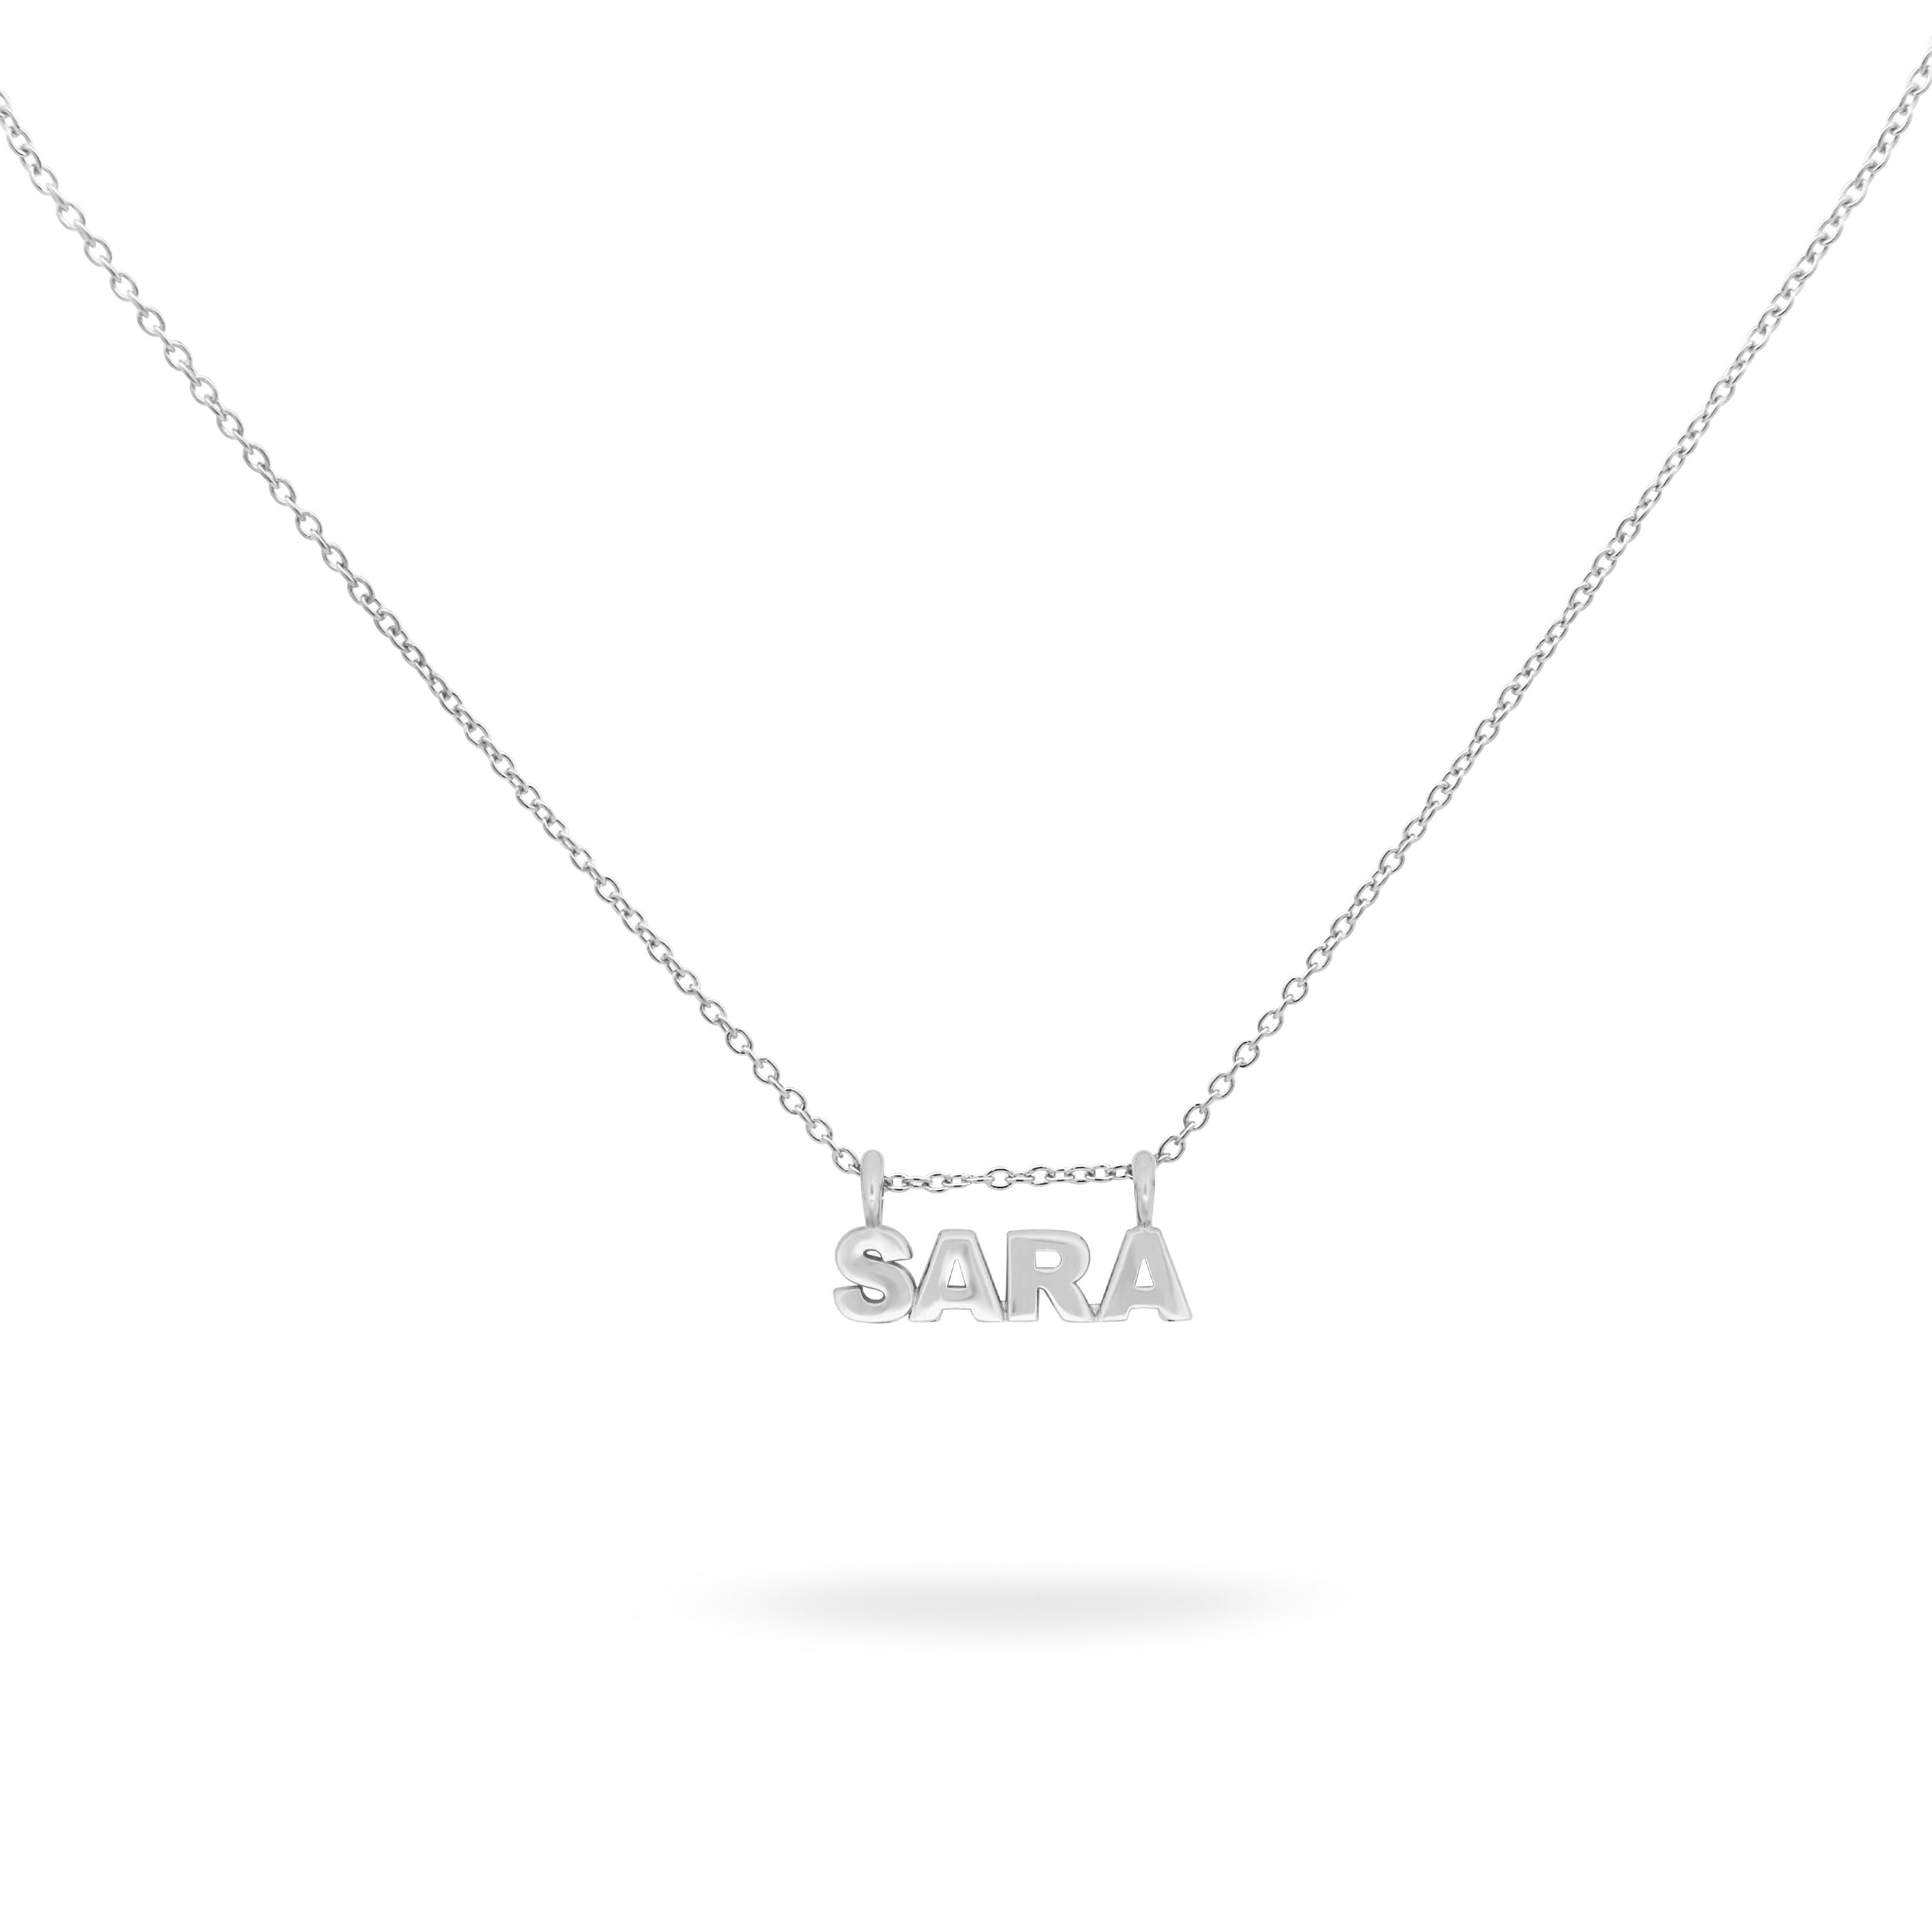 Chokers - Customizable necklace with name basic - 3 | Rue des Mille